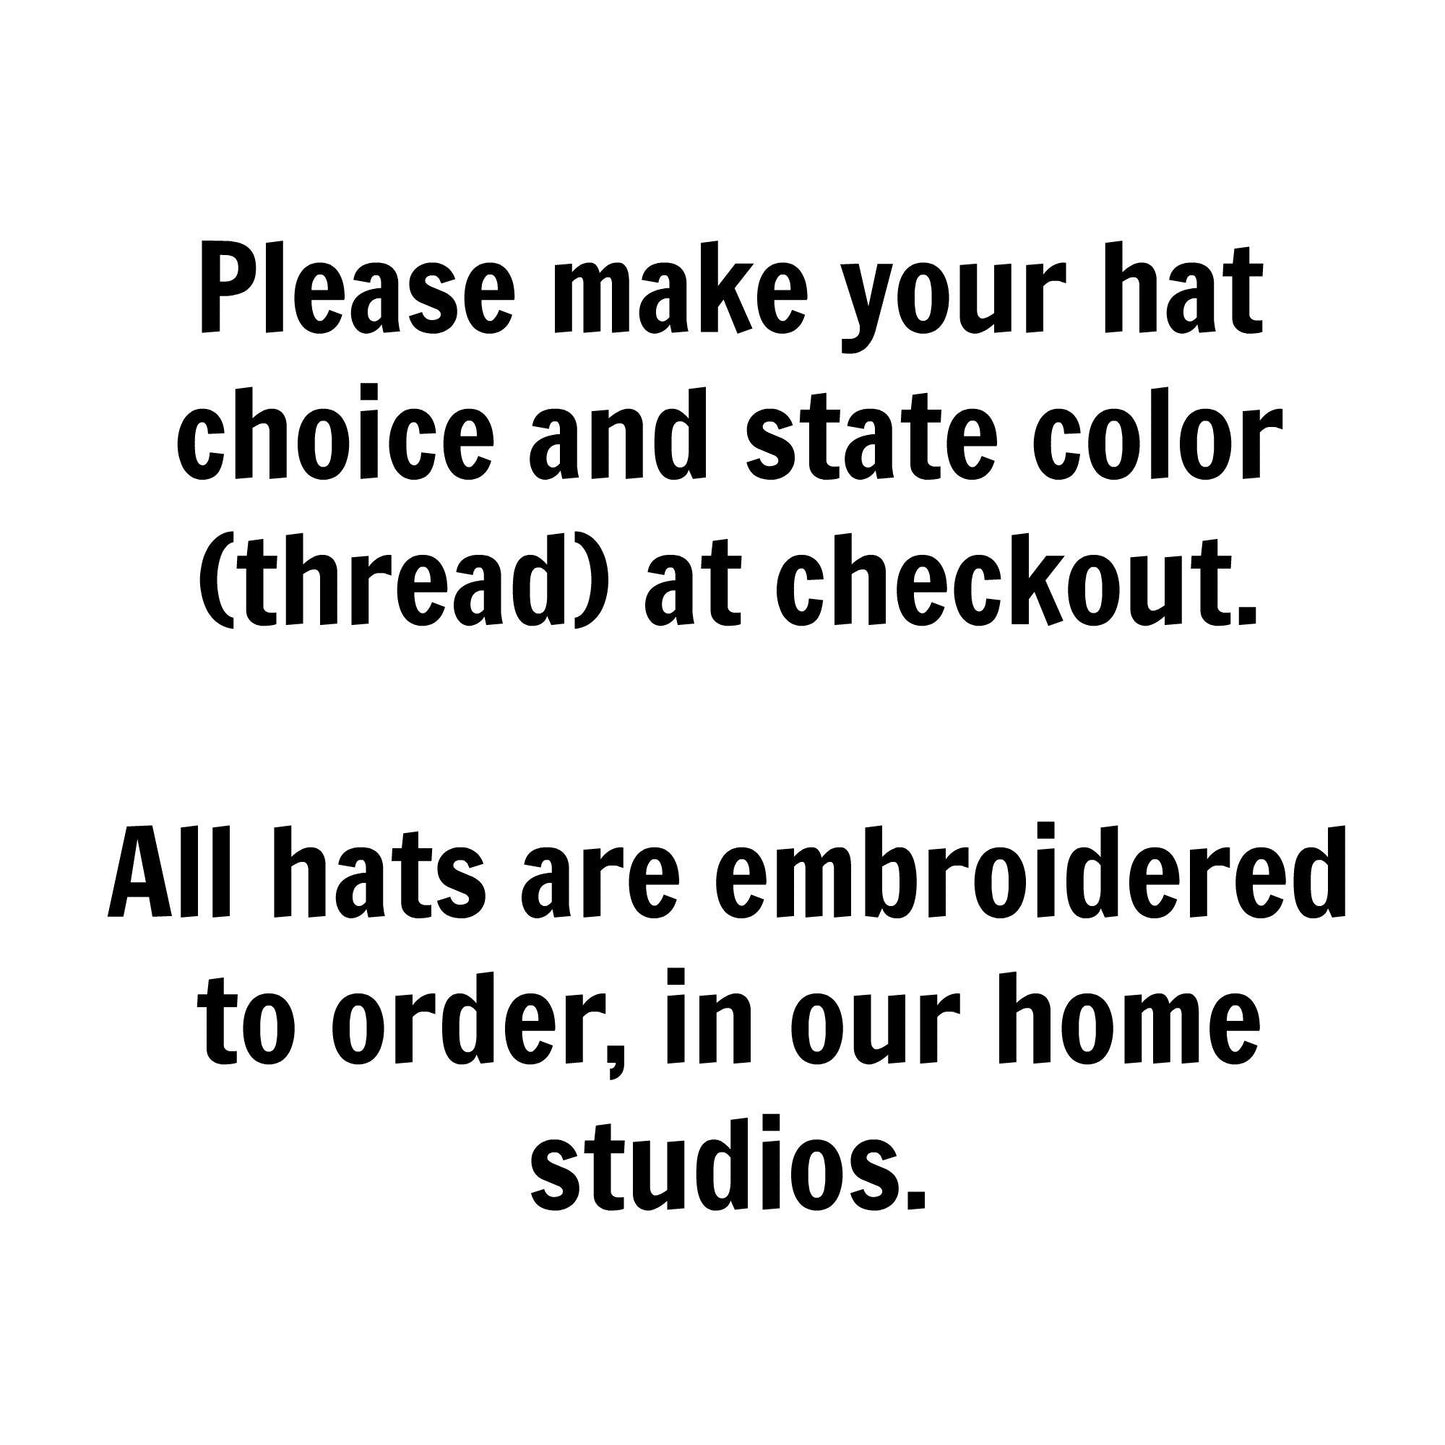 California Hat - Distressed Snapback Trucker Hat - California State Outline - Many Colors Available